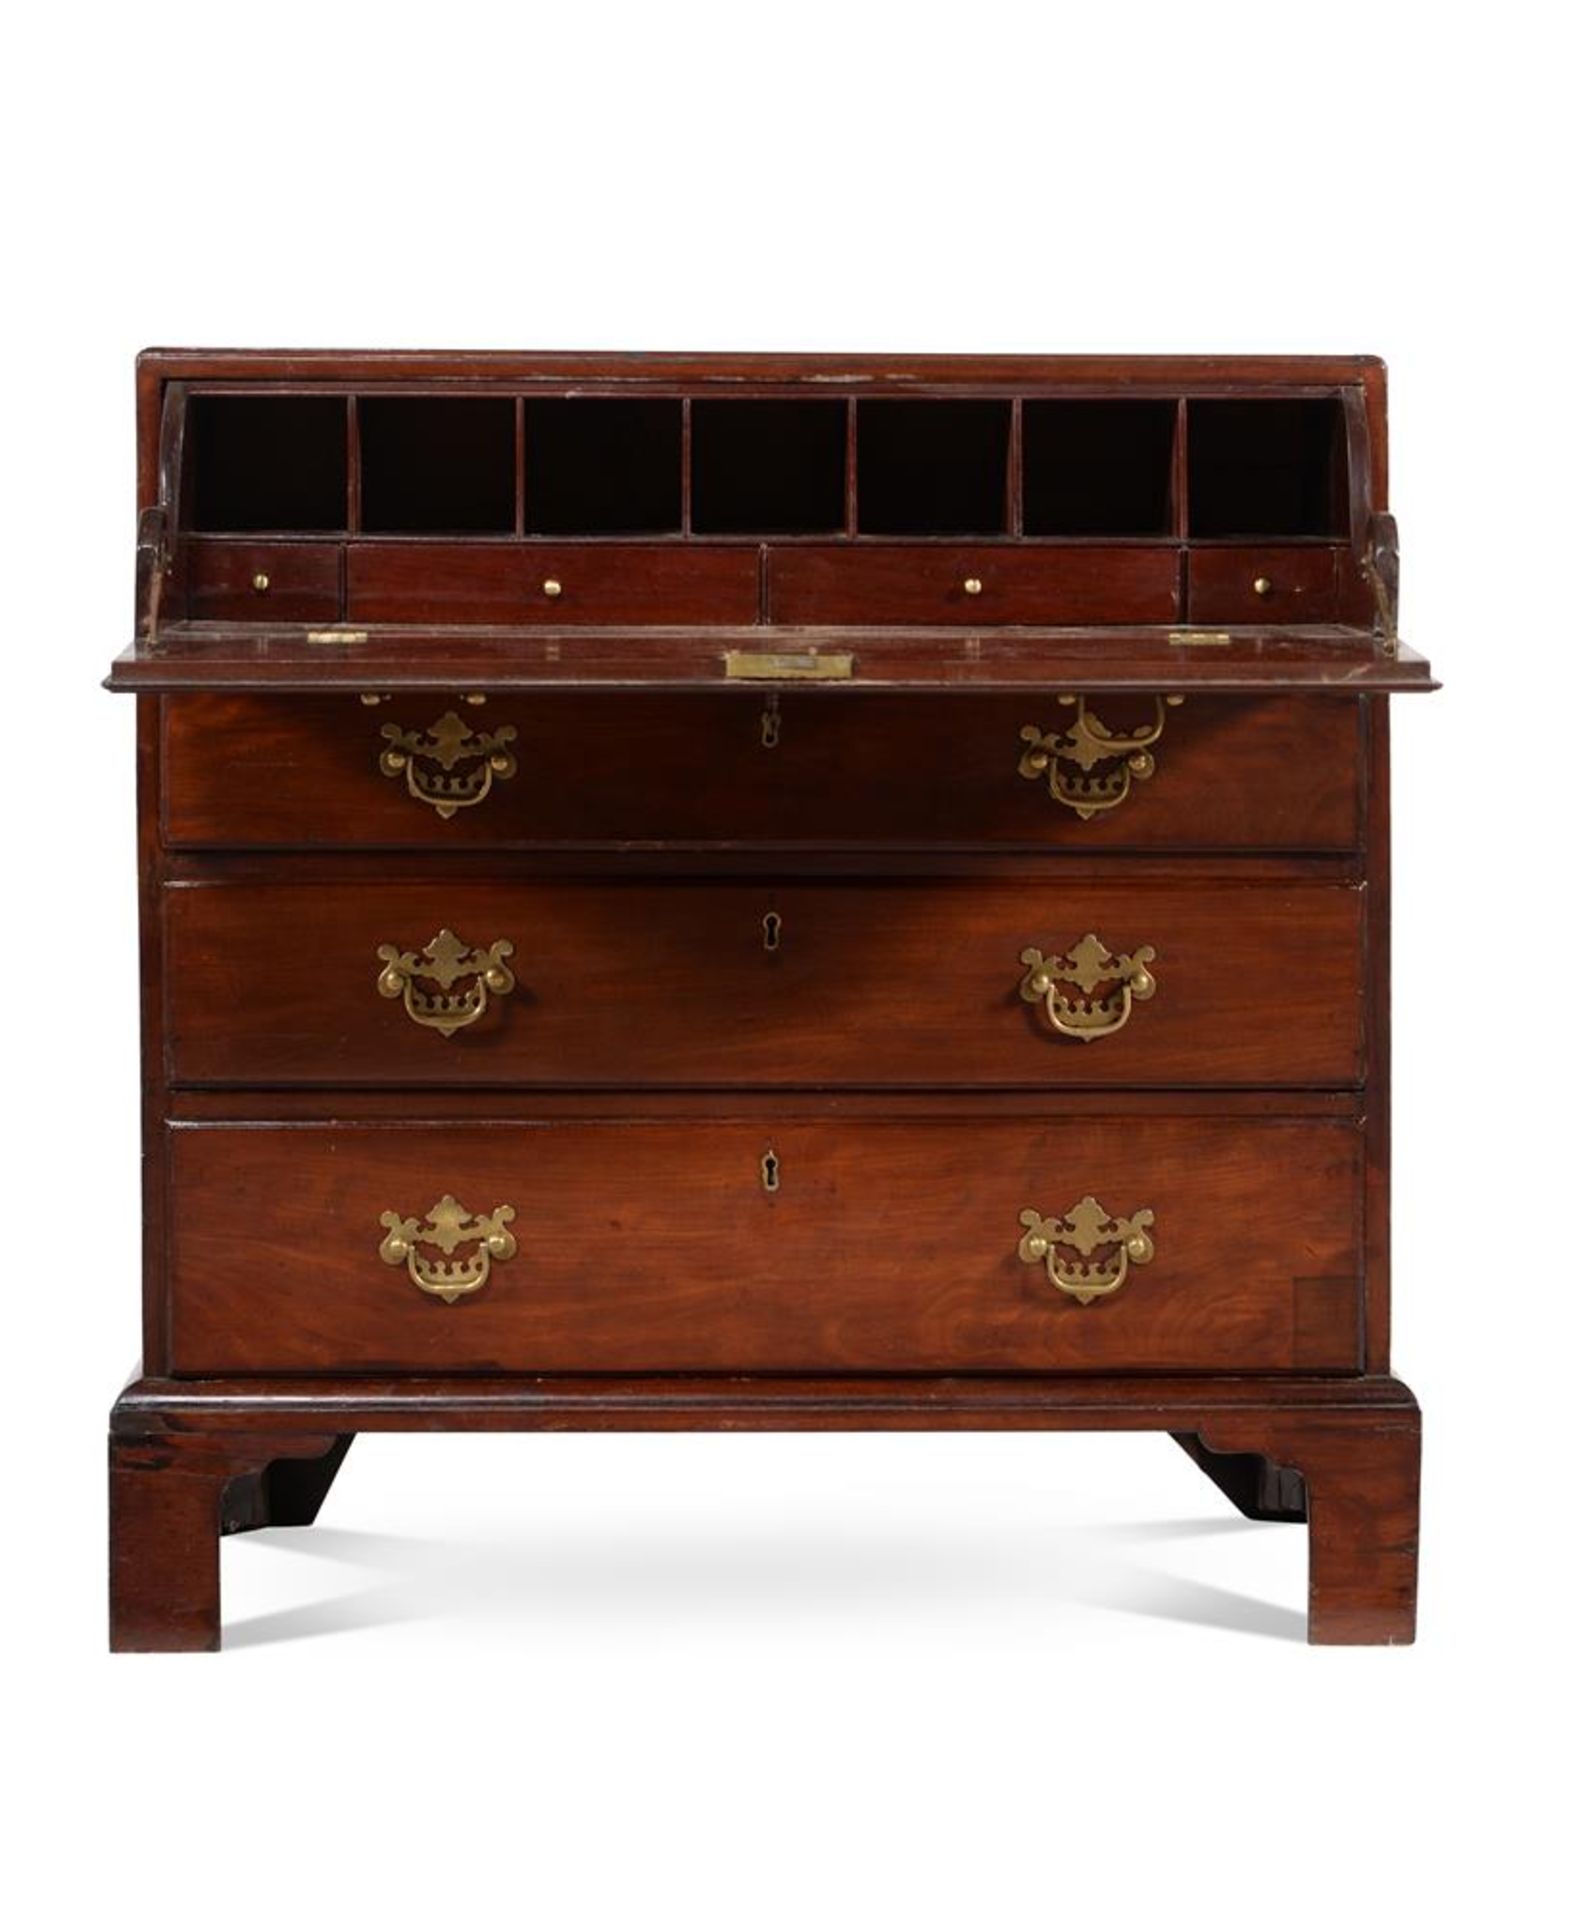 A GEORGE II MAHOGANY SECRETAIRE CHEST, MID-18TH CENTURY - Image 3 of 7